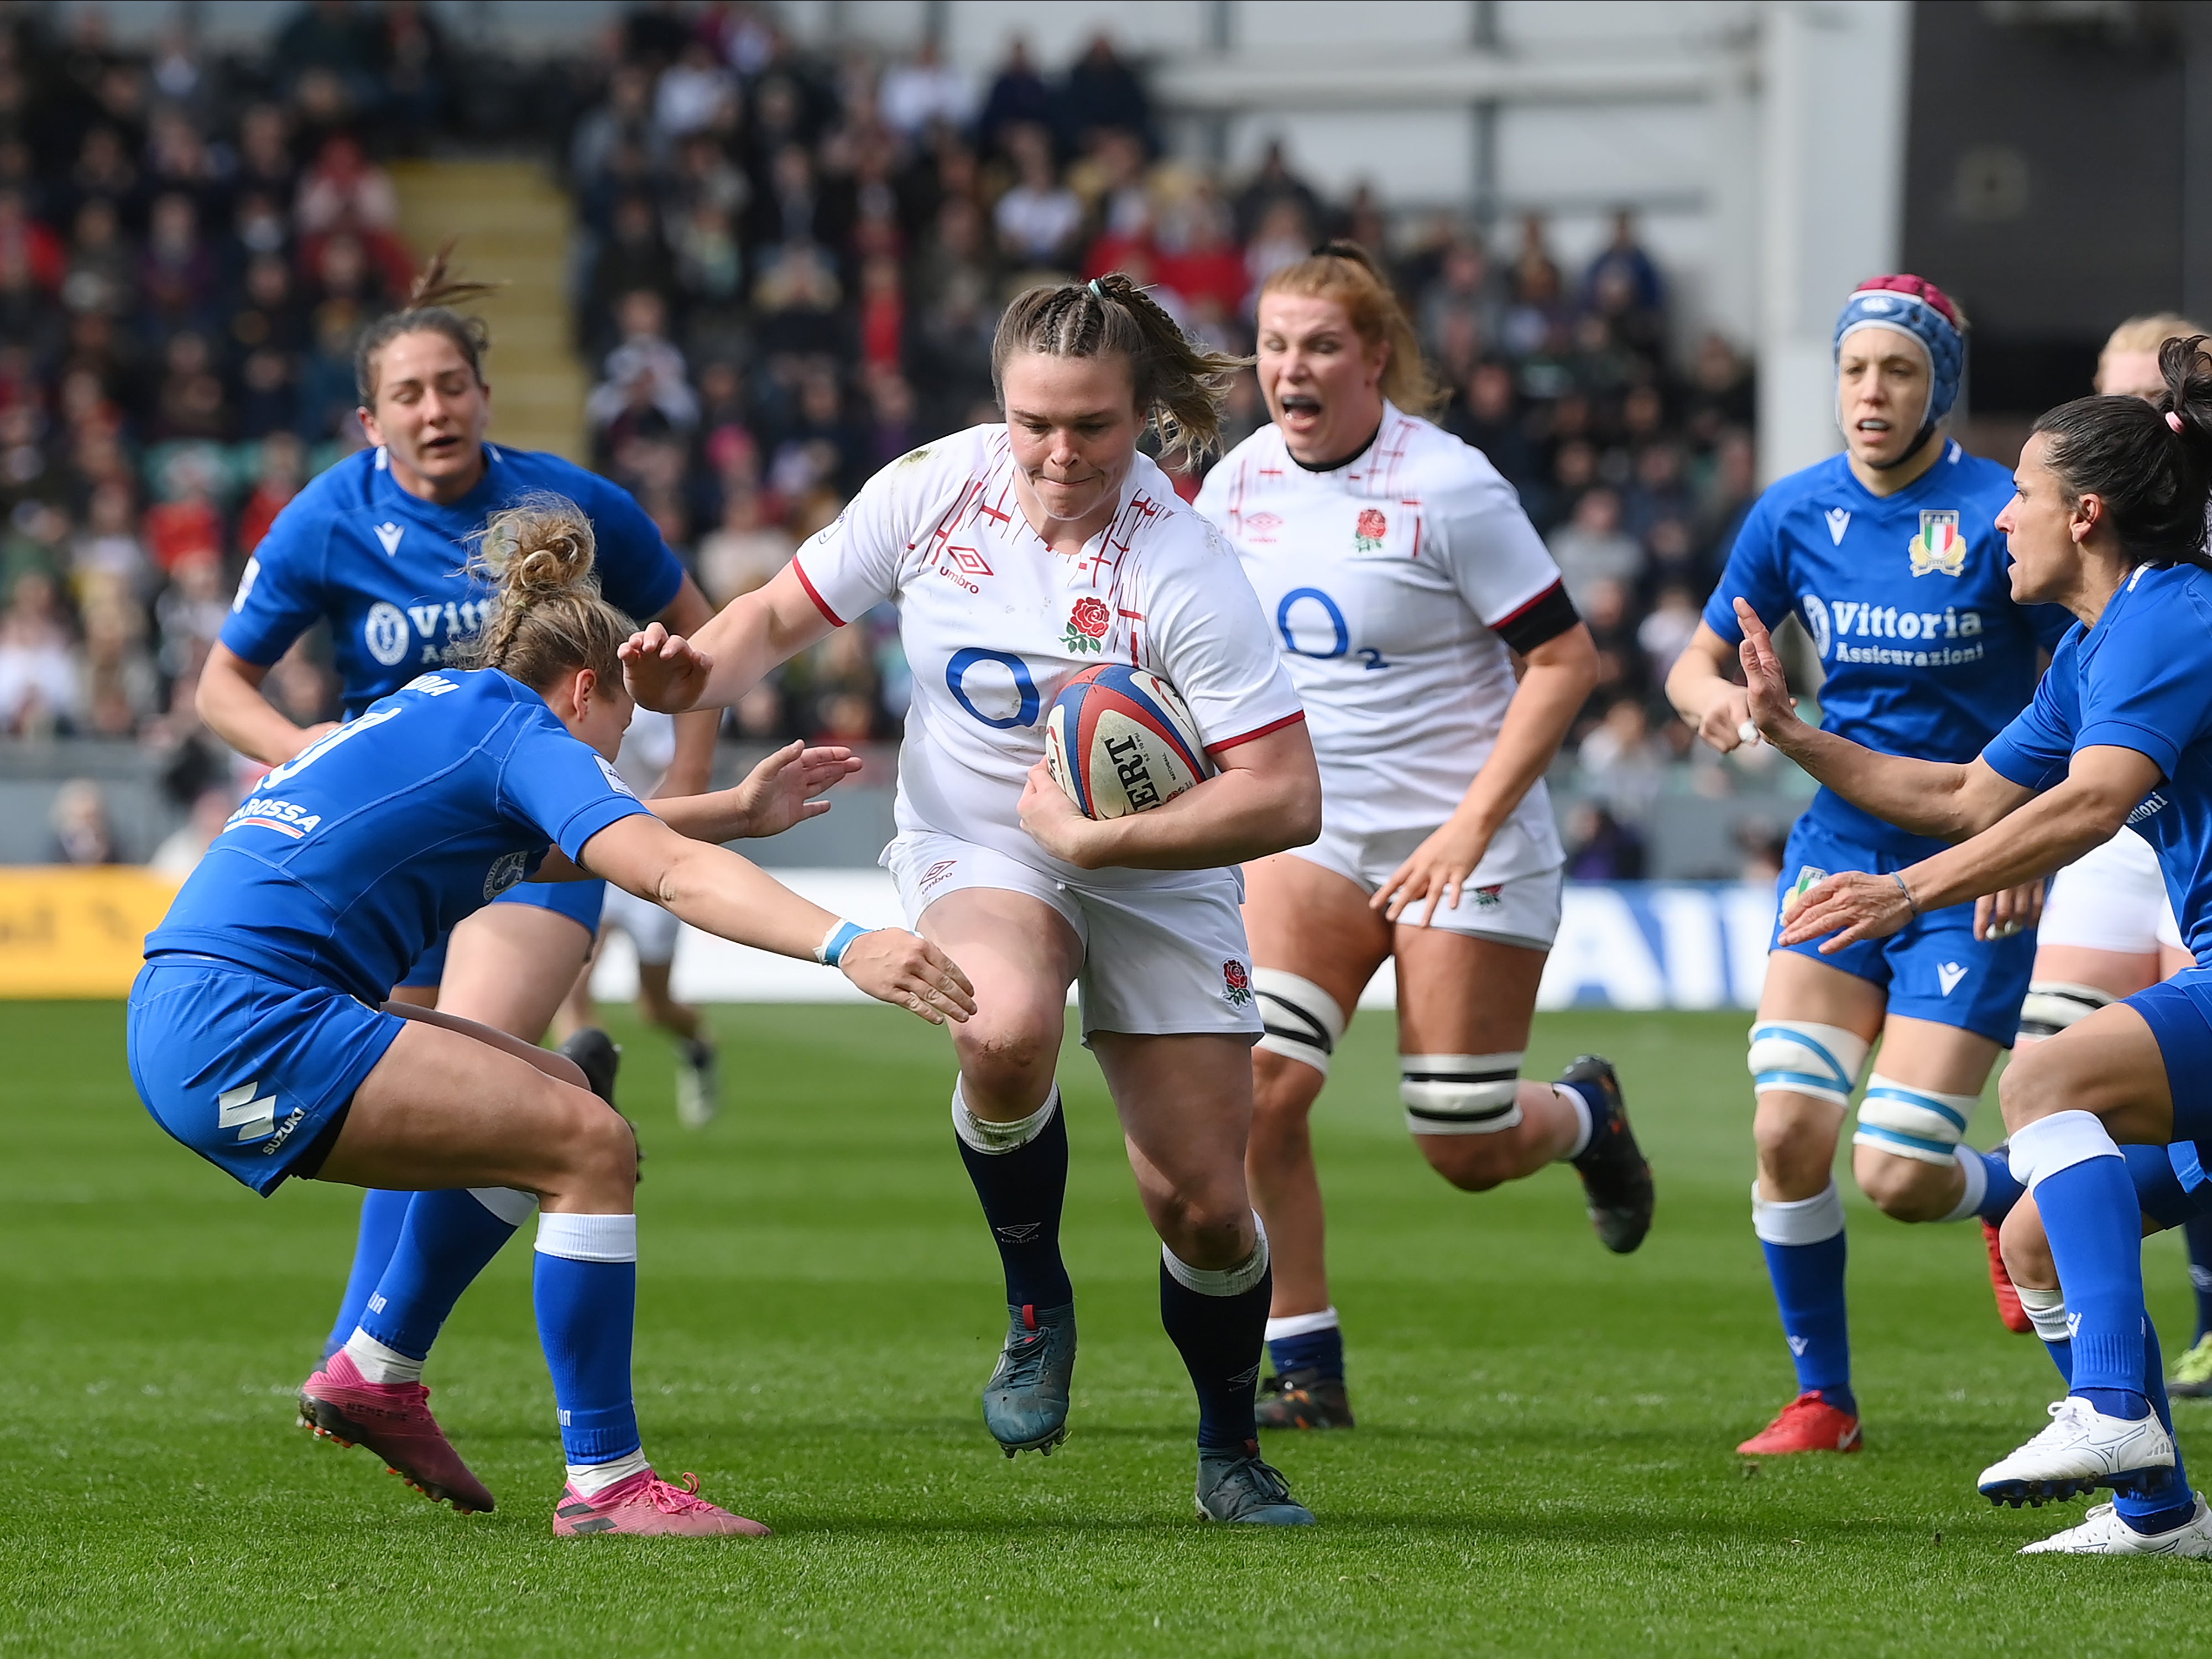 England prop Sarah Bern was one of the home side’s stars against Italy